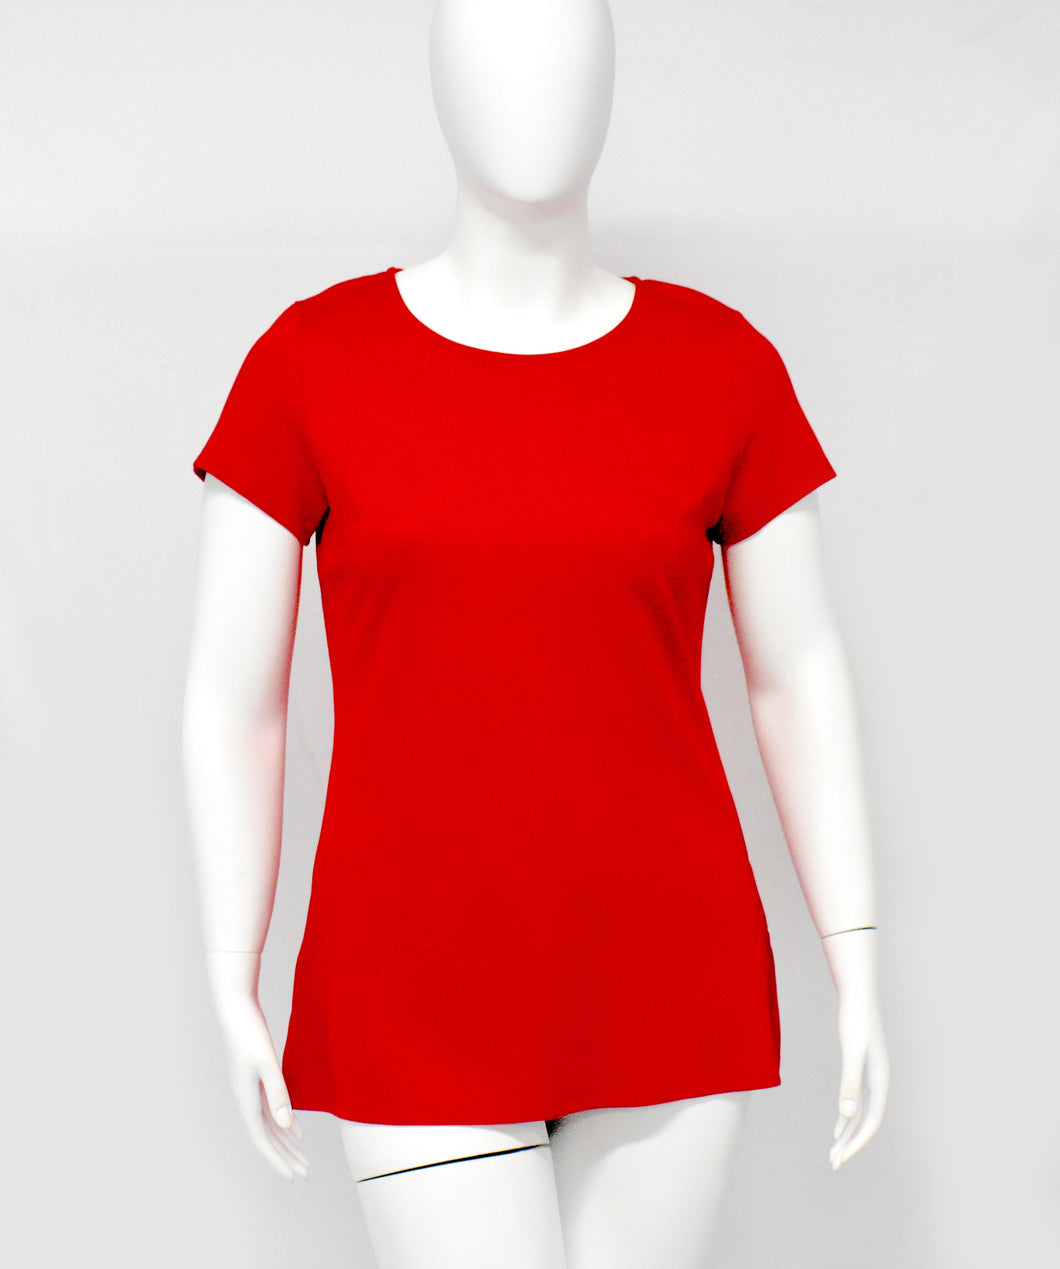 Soft Red Round Neck Comfy Cotton Spandex Top By Rapheeze